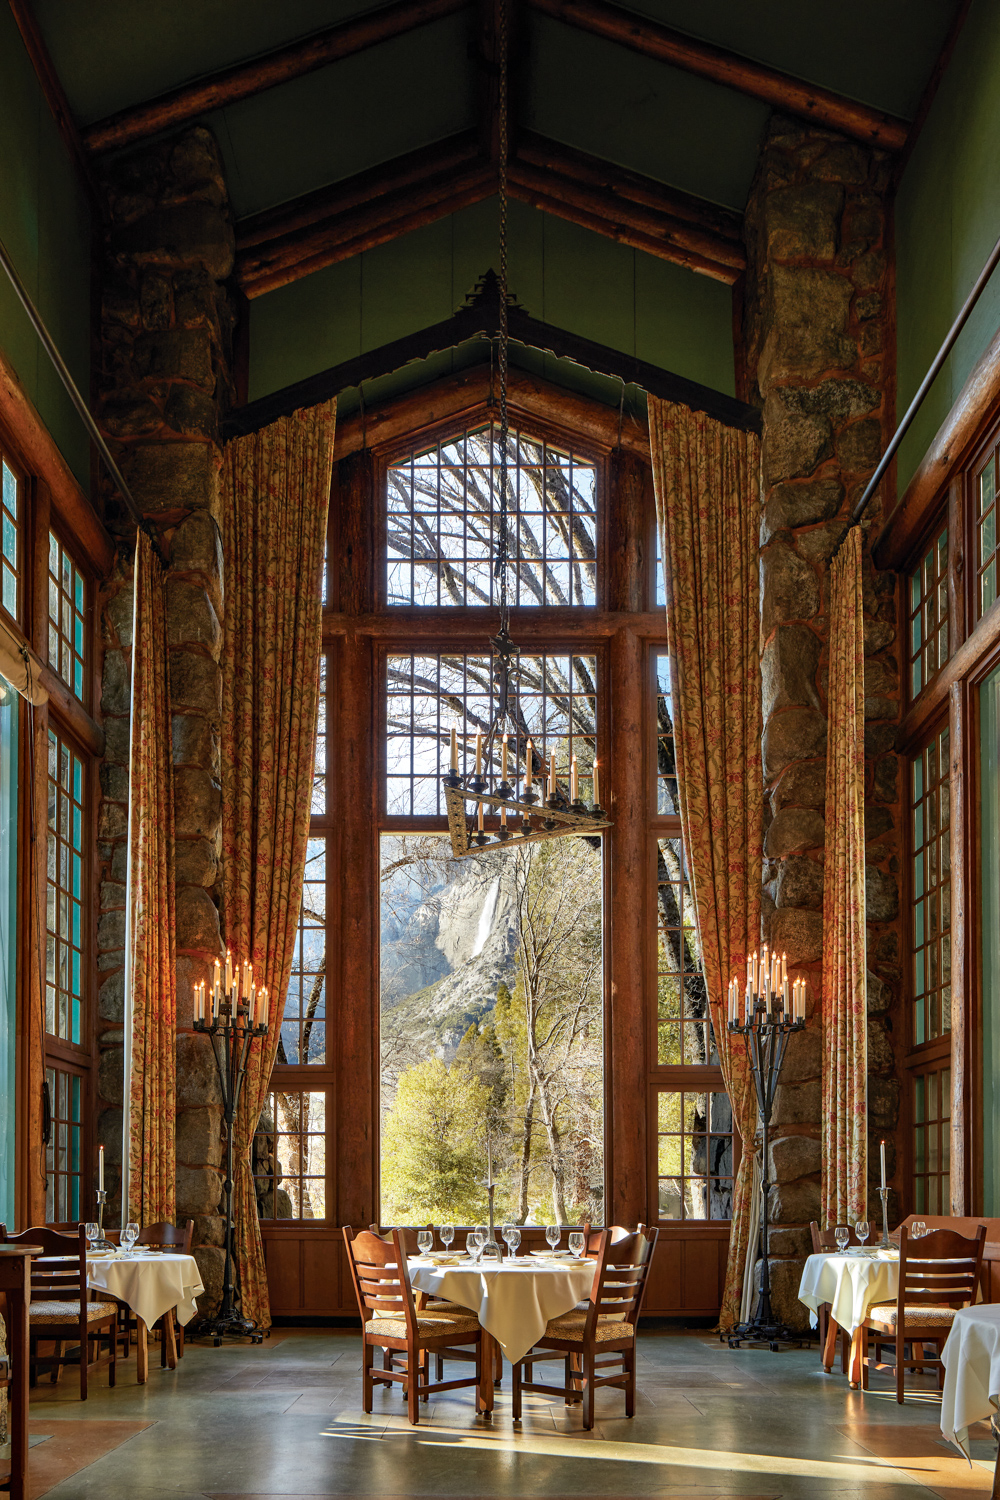 The dining room at the Ahwahnee Hotel in book by Max Humphrey